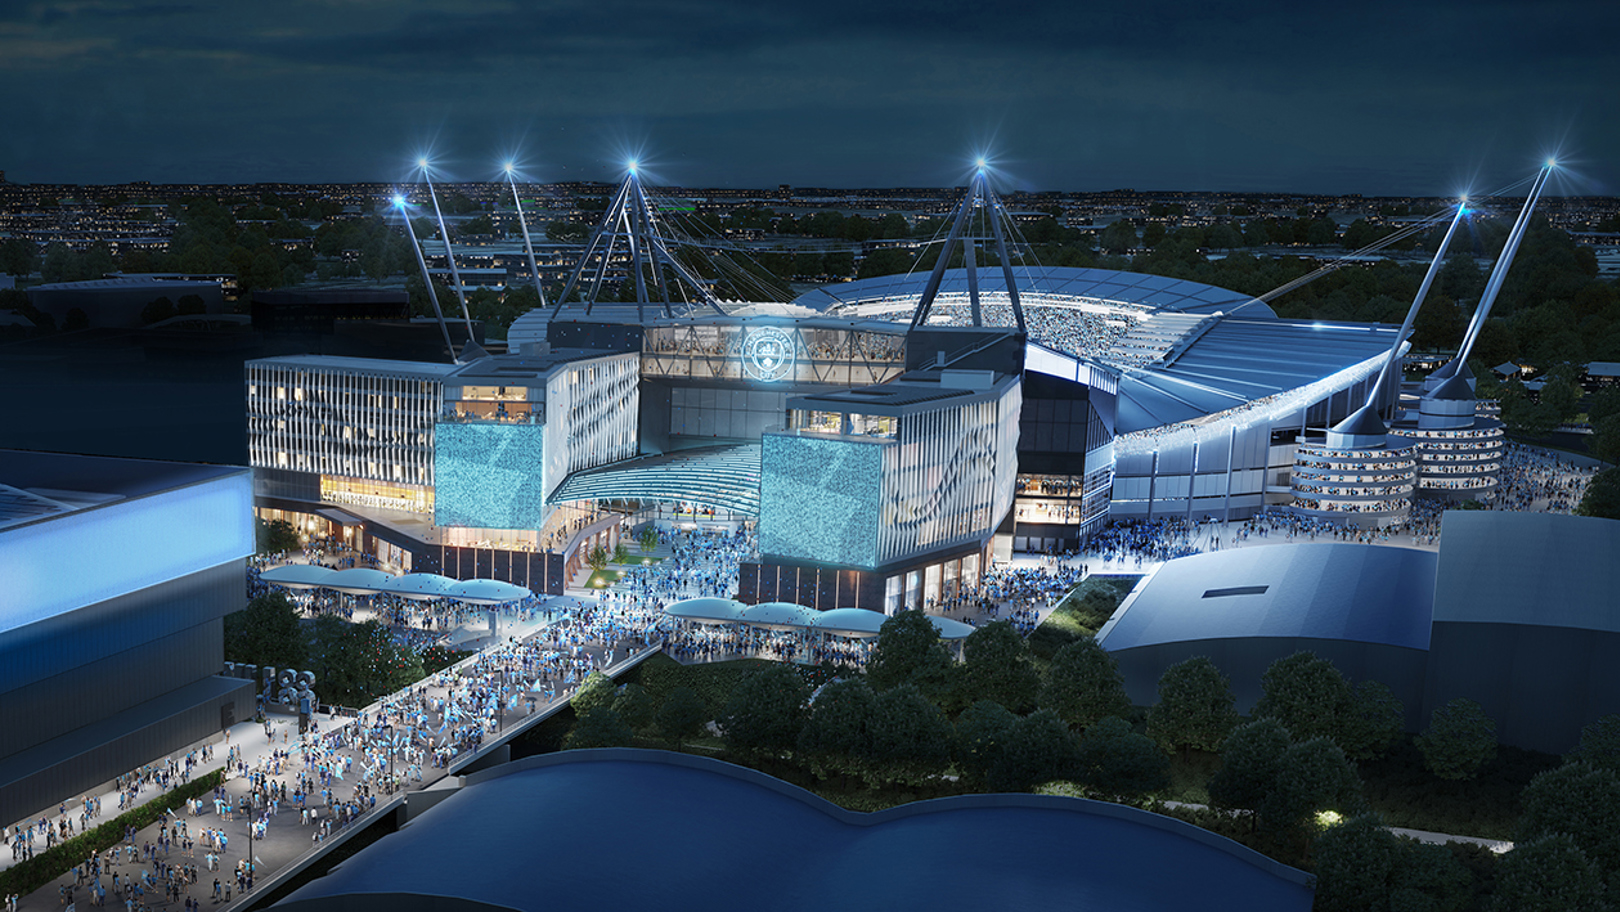 Manchester City submits planning application for entertainment destination  at the Etihad Stadium